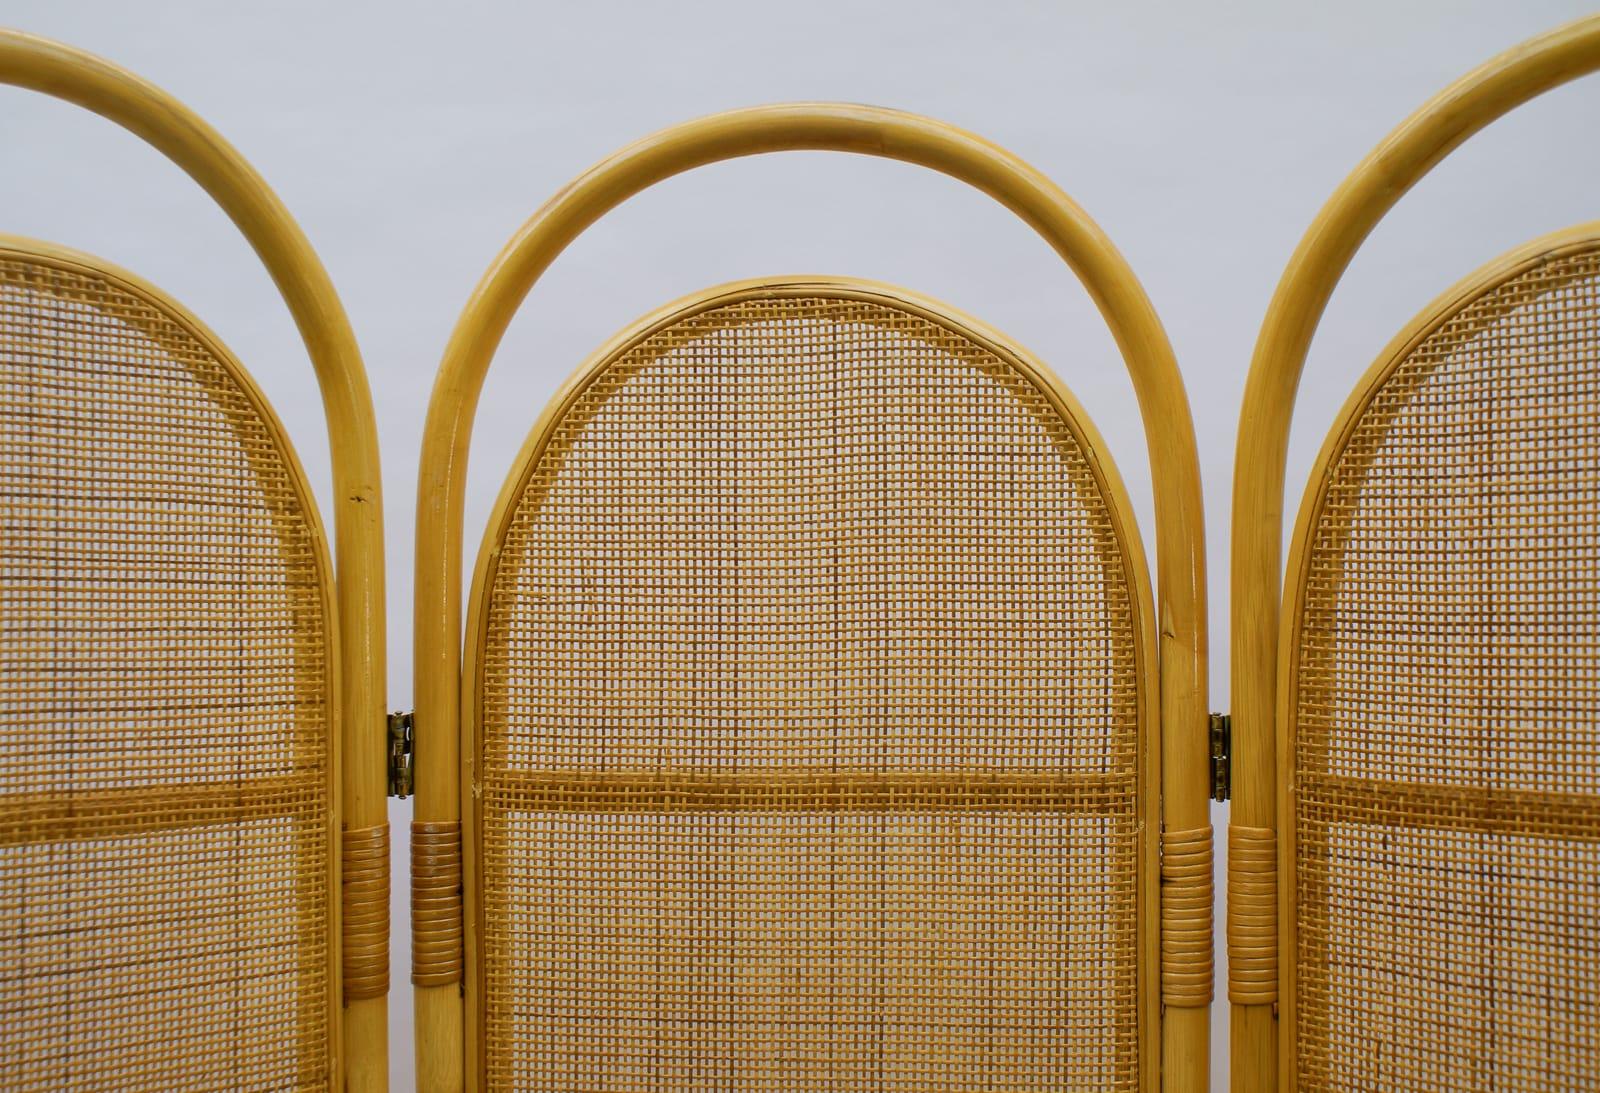 Sculptural Three-Panel Folding Screen Room Divider in Rattan and Wicker, 1960s In Good Condition For Sale In Nürnberg, Bayern